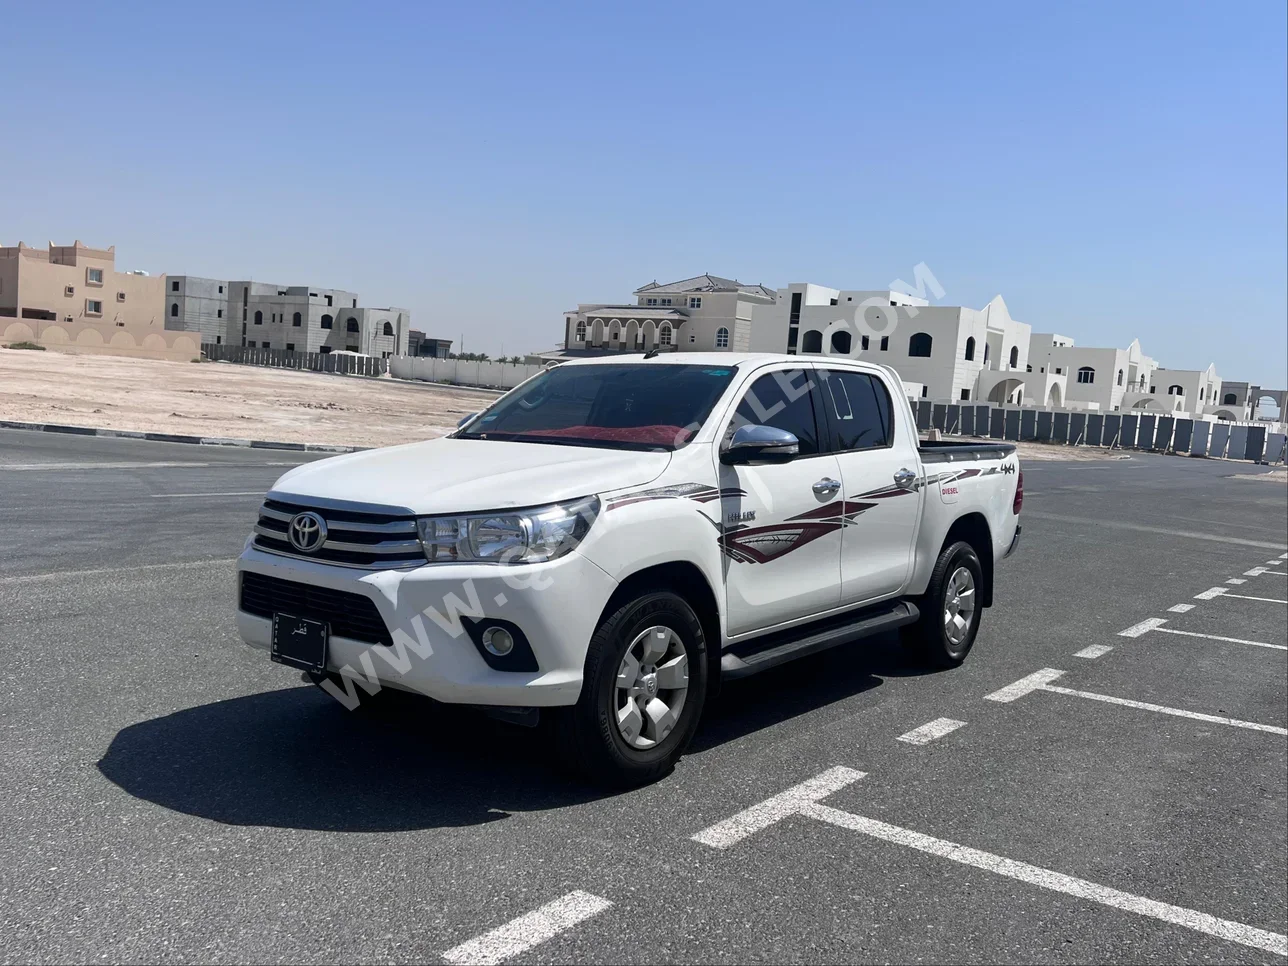 Toyota  Hilux  2017  Manual  190,000 Km  4 Cylinder  Four Wheel Drive (4WD)  Pick Up  White